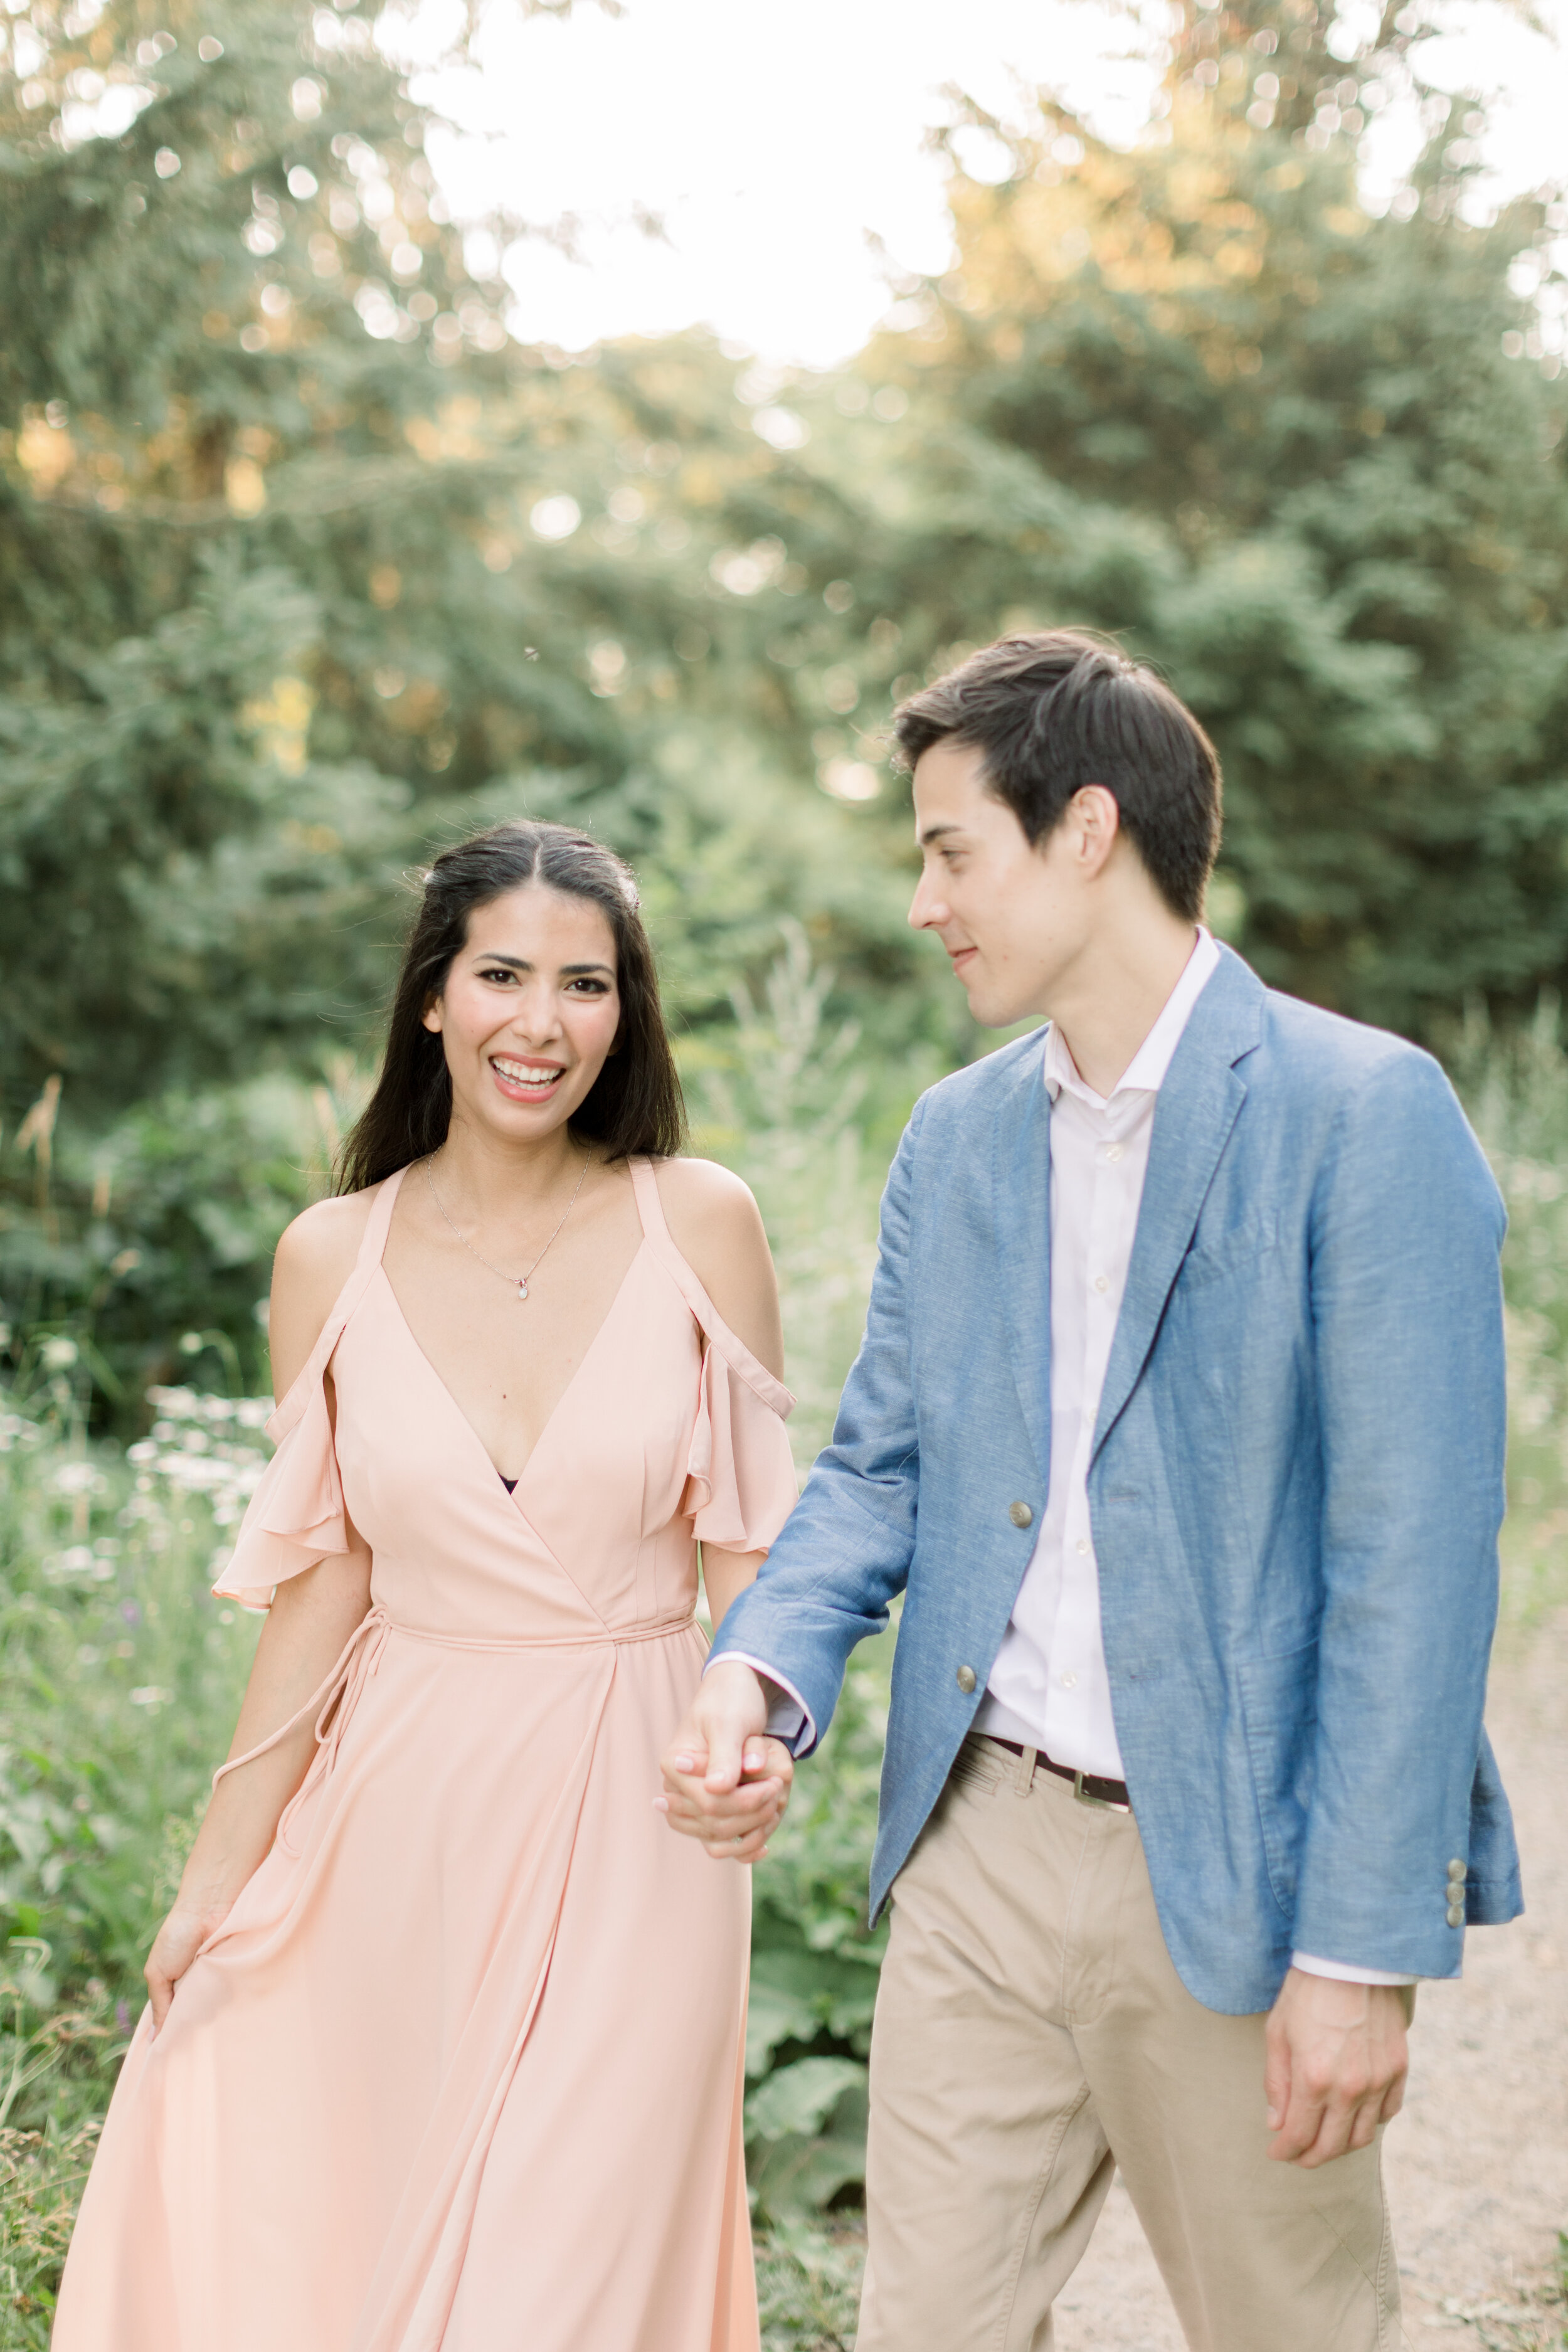  Perfect outdoor location at the aboretum with lush greenery in Ottawa, ON by Chelsea Mason Photography. outdoor locations for photoshoot best locations for photoshoots in ottawa where should we take engagements in ottawa best wedding photographer in